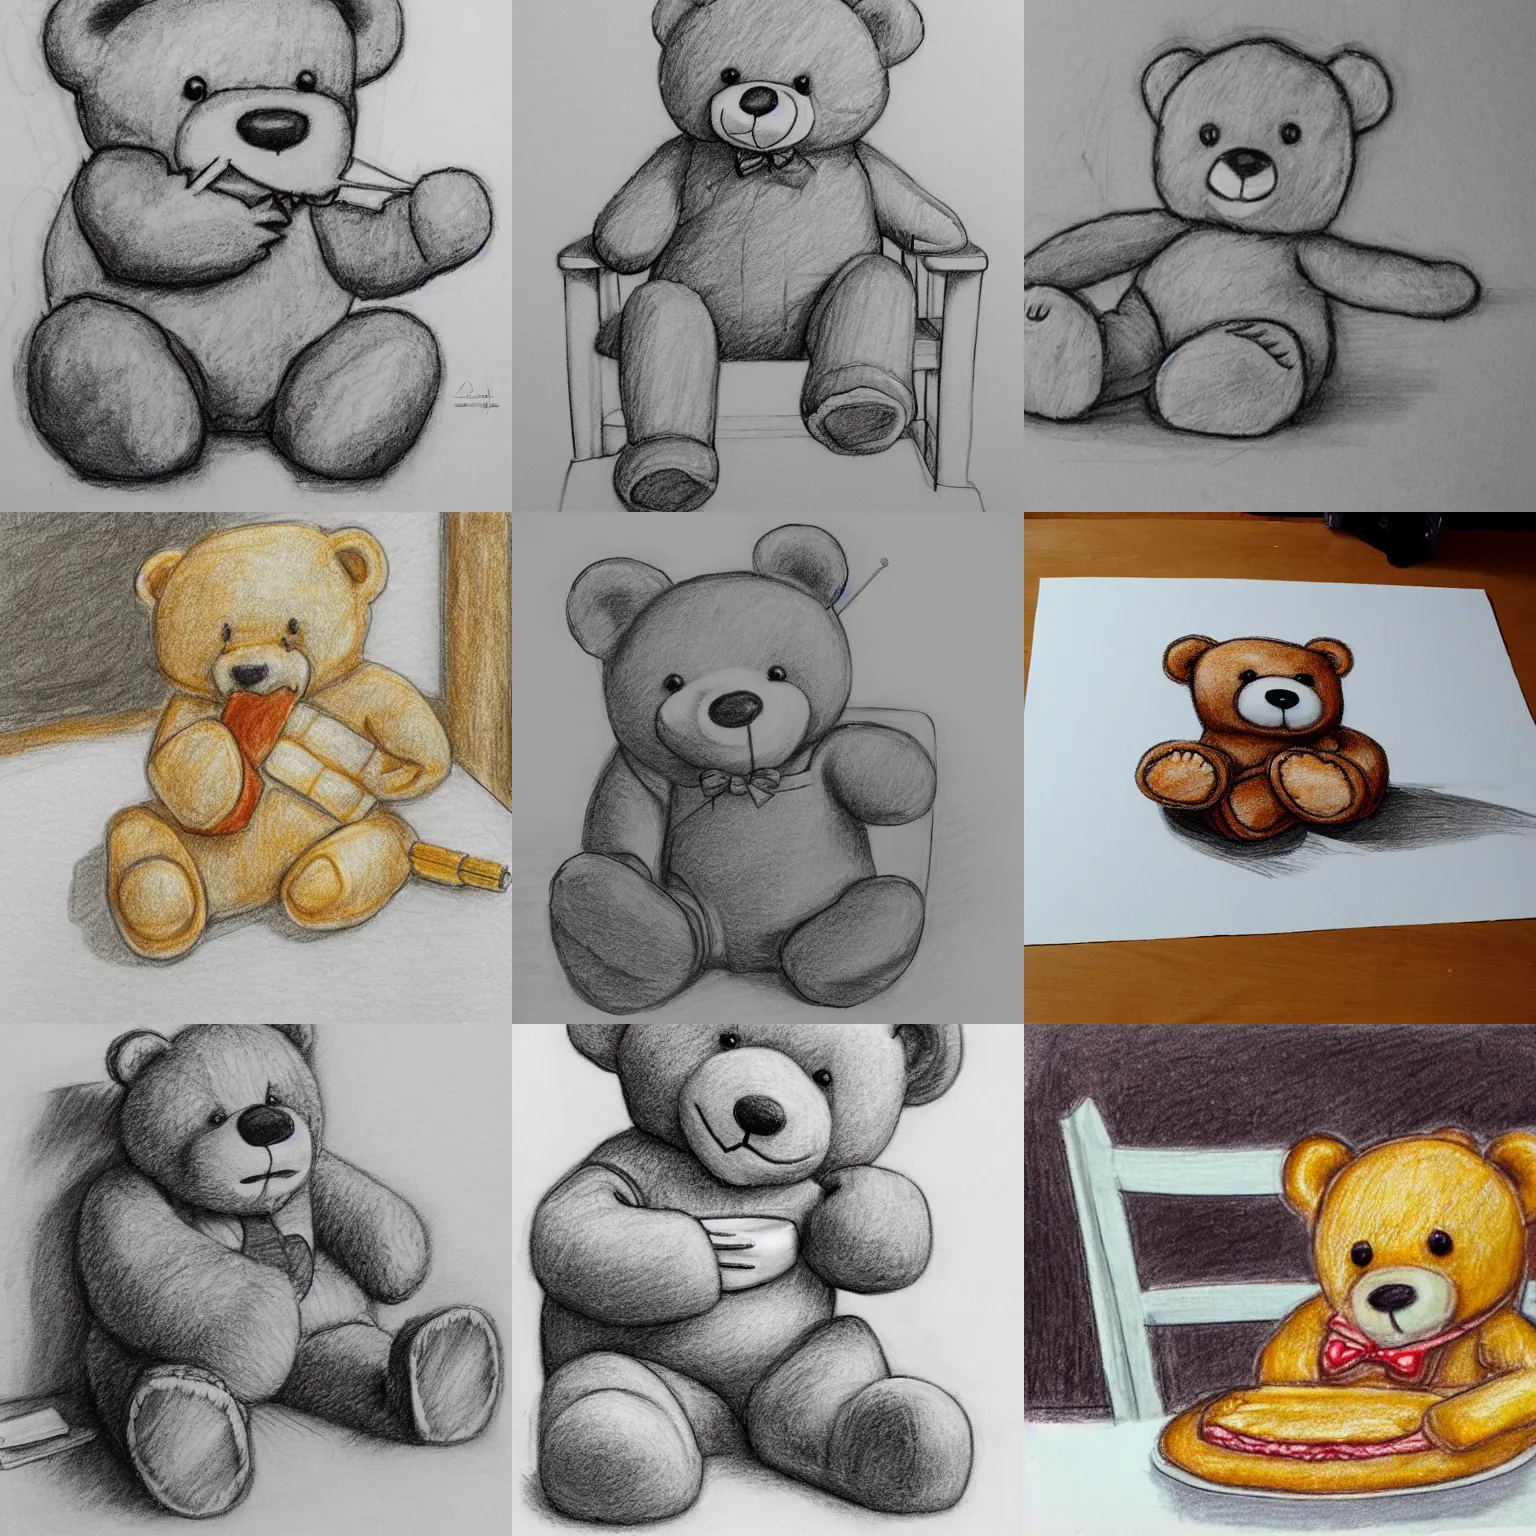 Teddy Bear Drawing Cliparts, Stock Vector and Royalty Free Teddy Bear  Drawing Illustrations